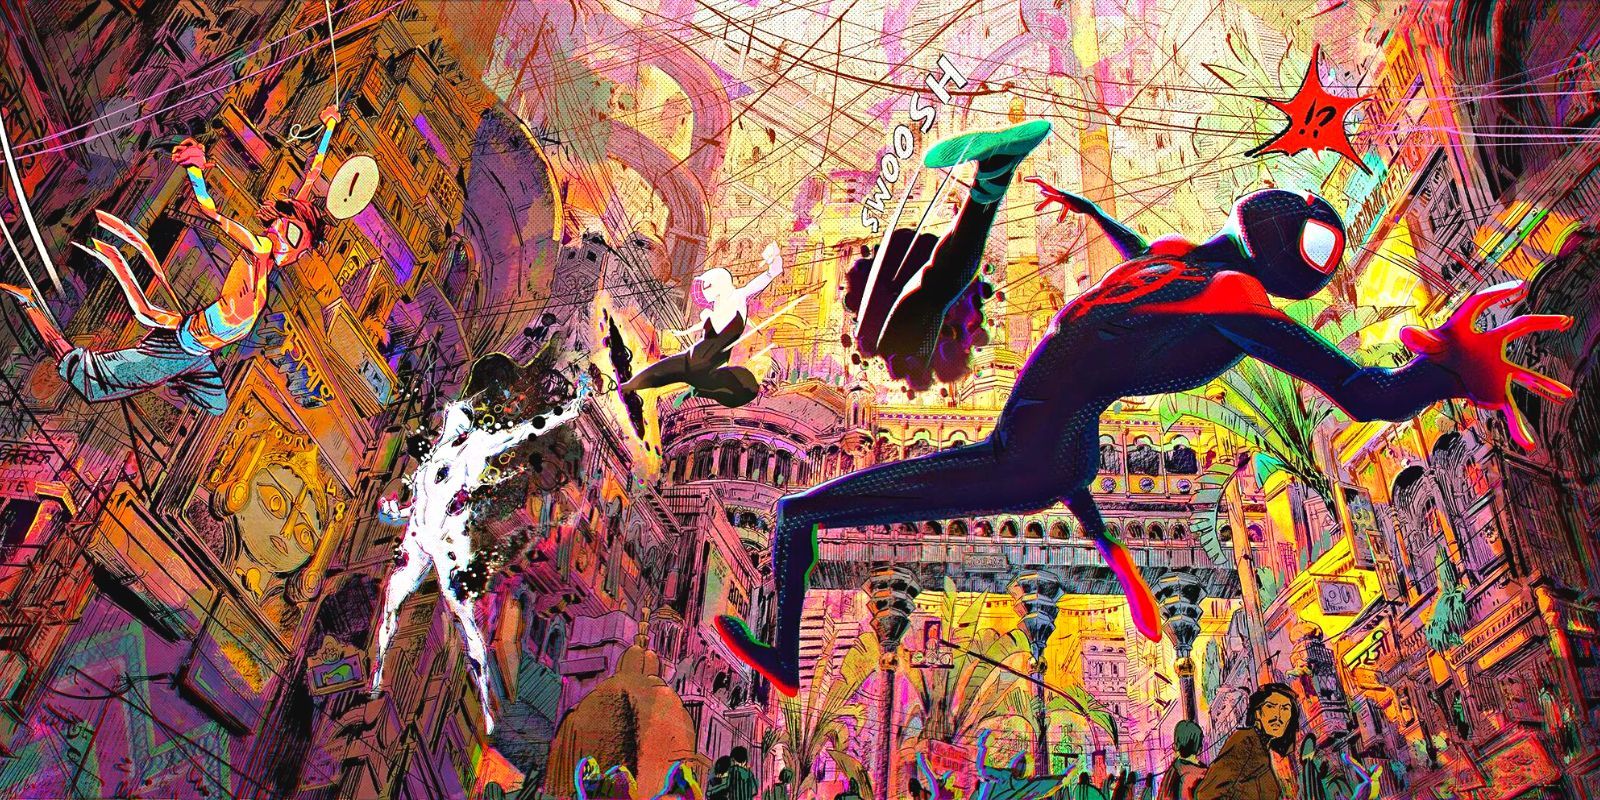 Expect Spider-Verse 3 to be delayed, according to one insider on the  project